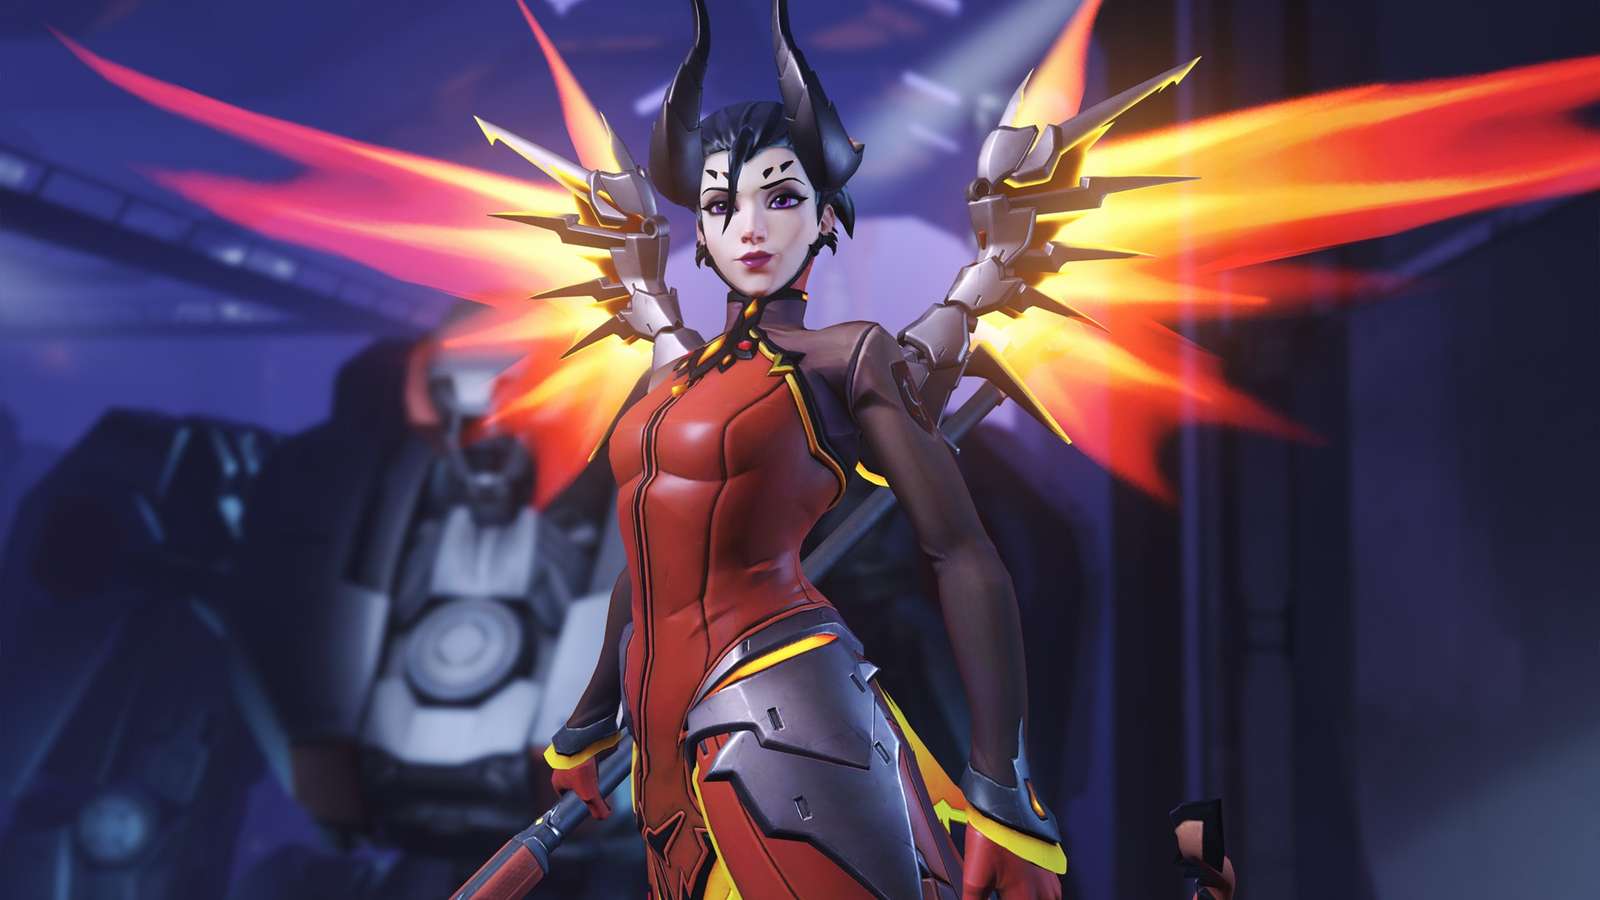 mercy of ow puzzle online from photo